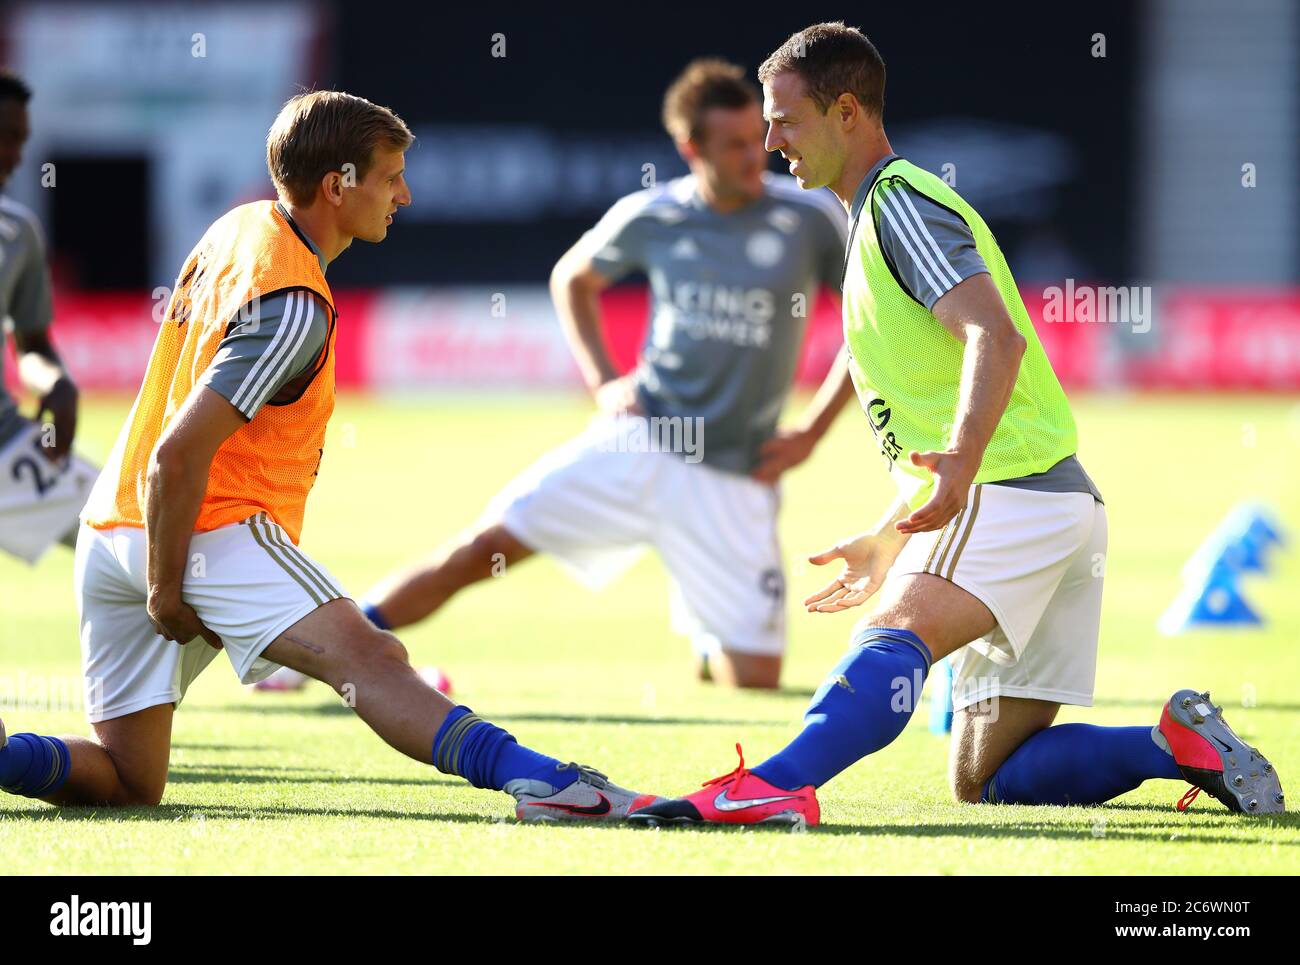 Leicester City's Marc Albrighton (left) and Jonny Evans warming up before the Premier League match at The Vitality Stadium, Bournemouth. Stock Photo